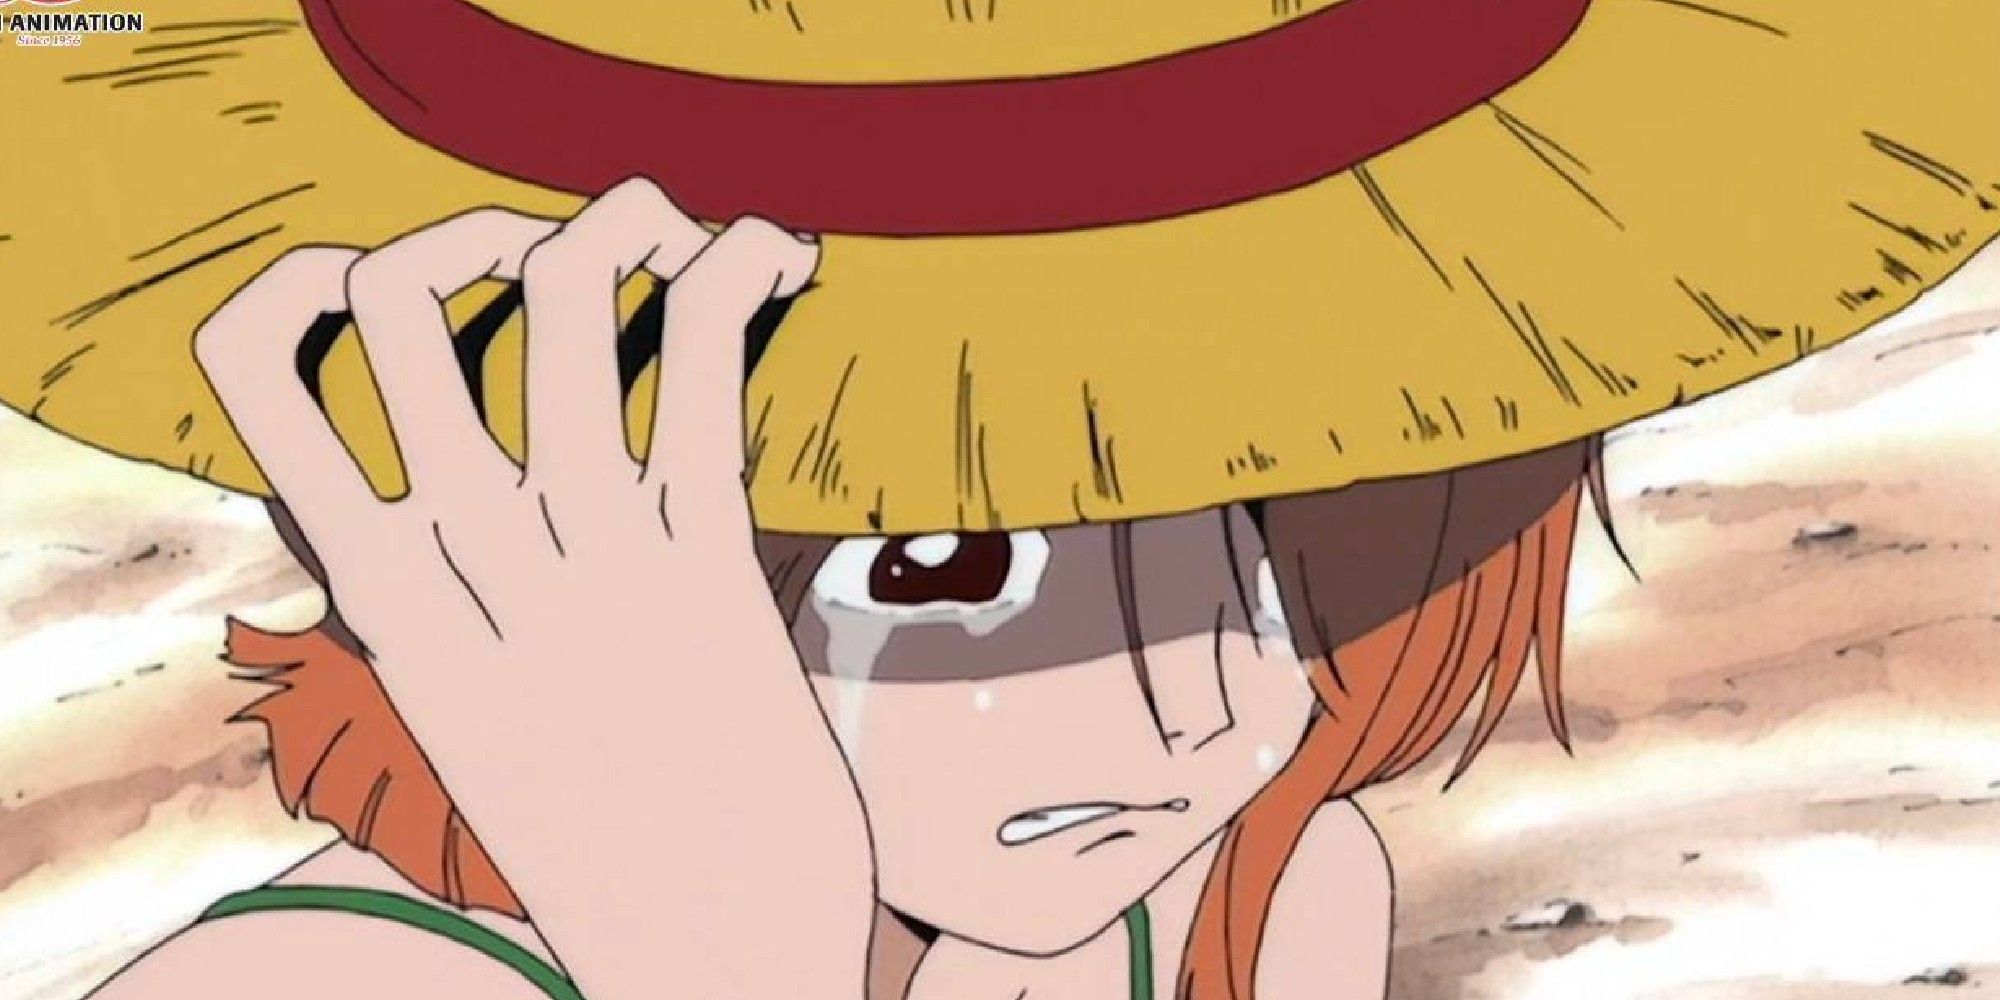 Nami cries after Luffy puts his hat on her head